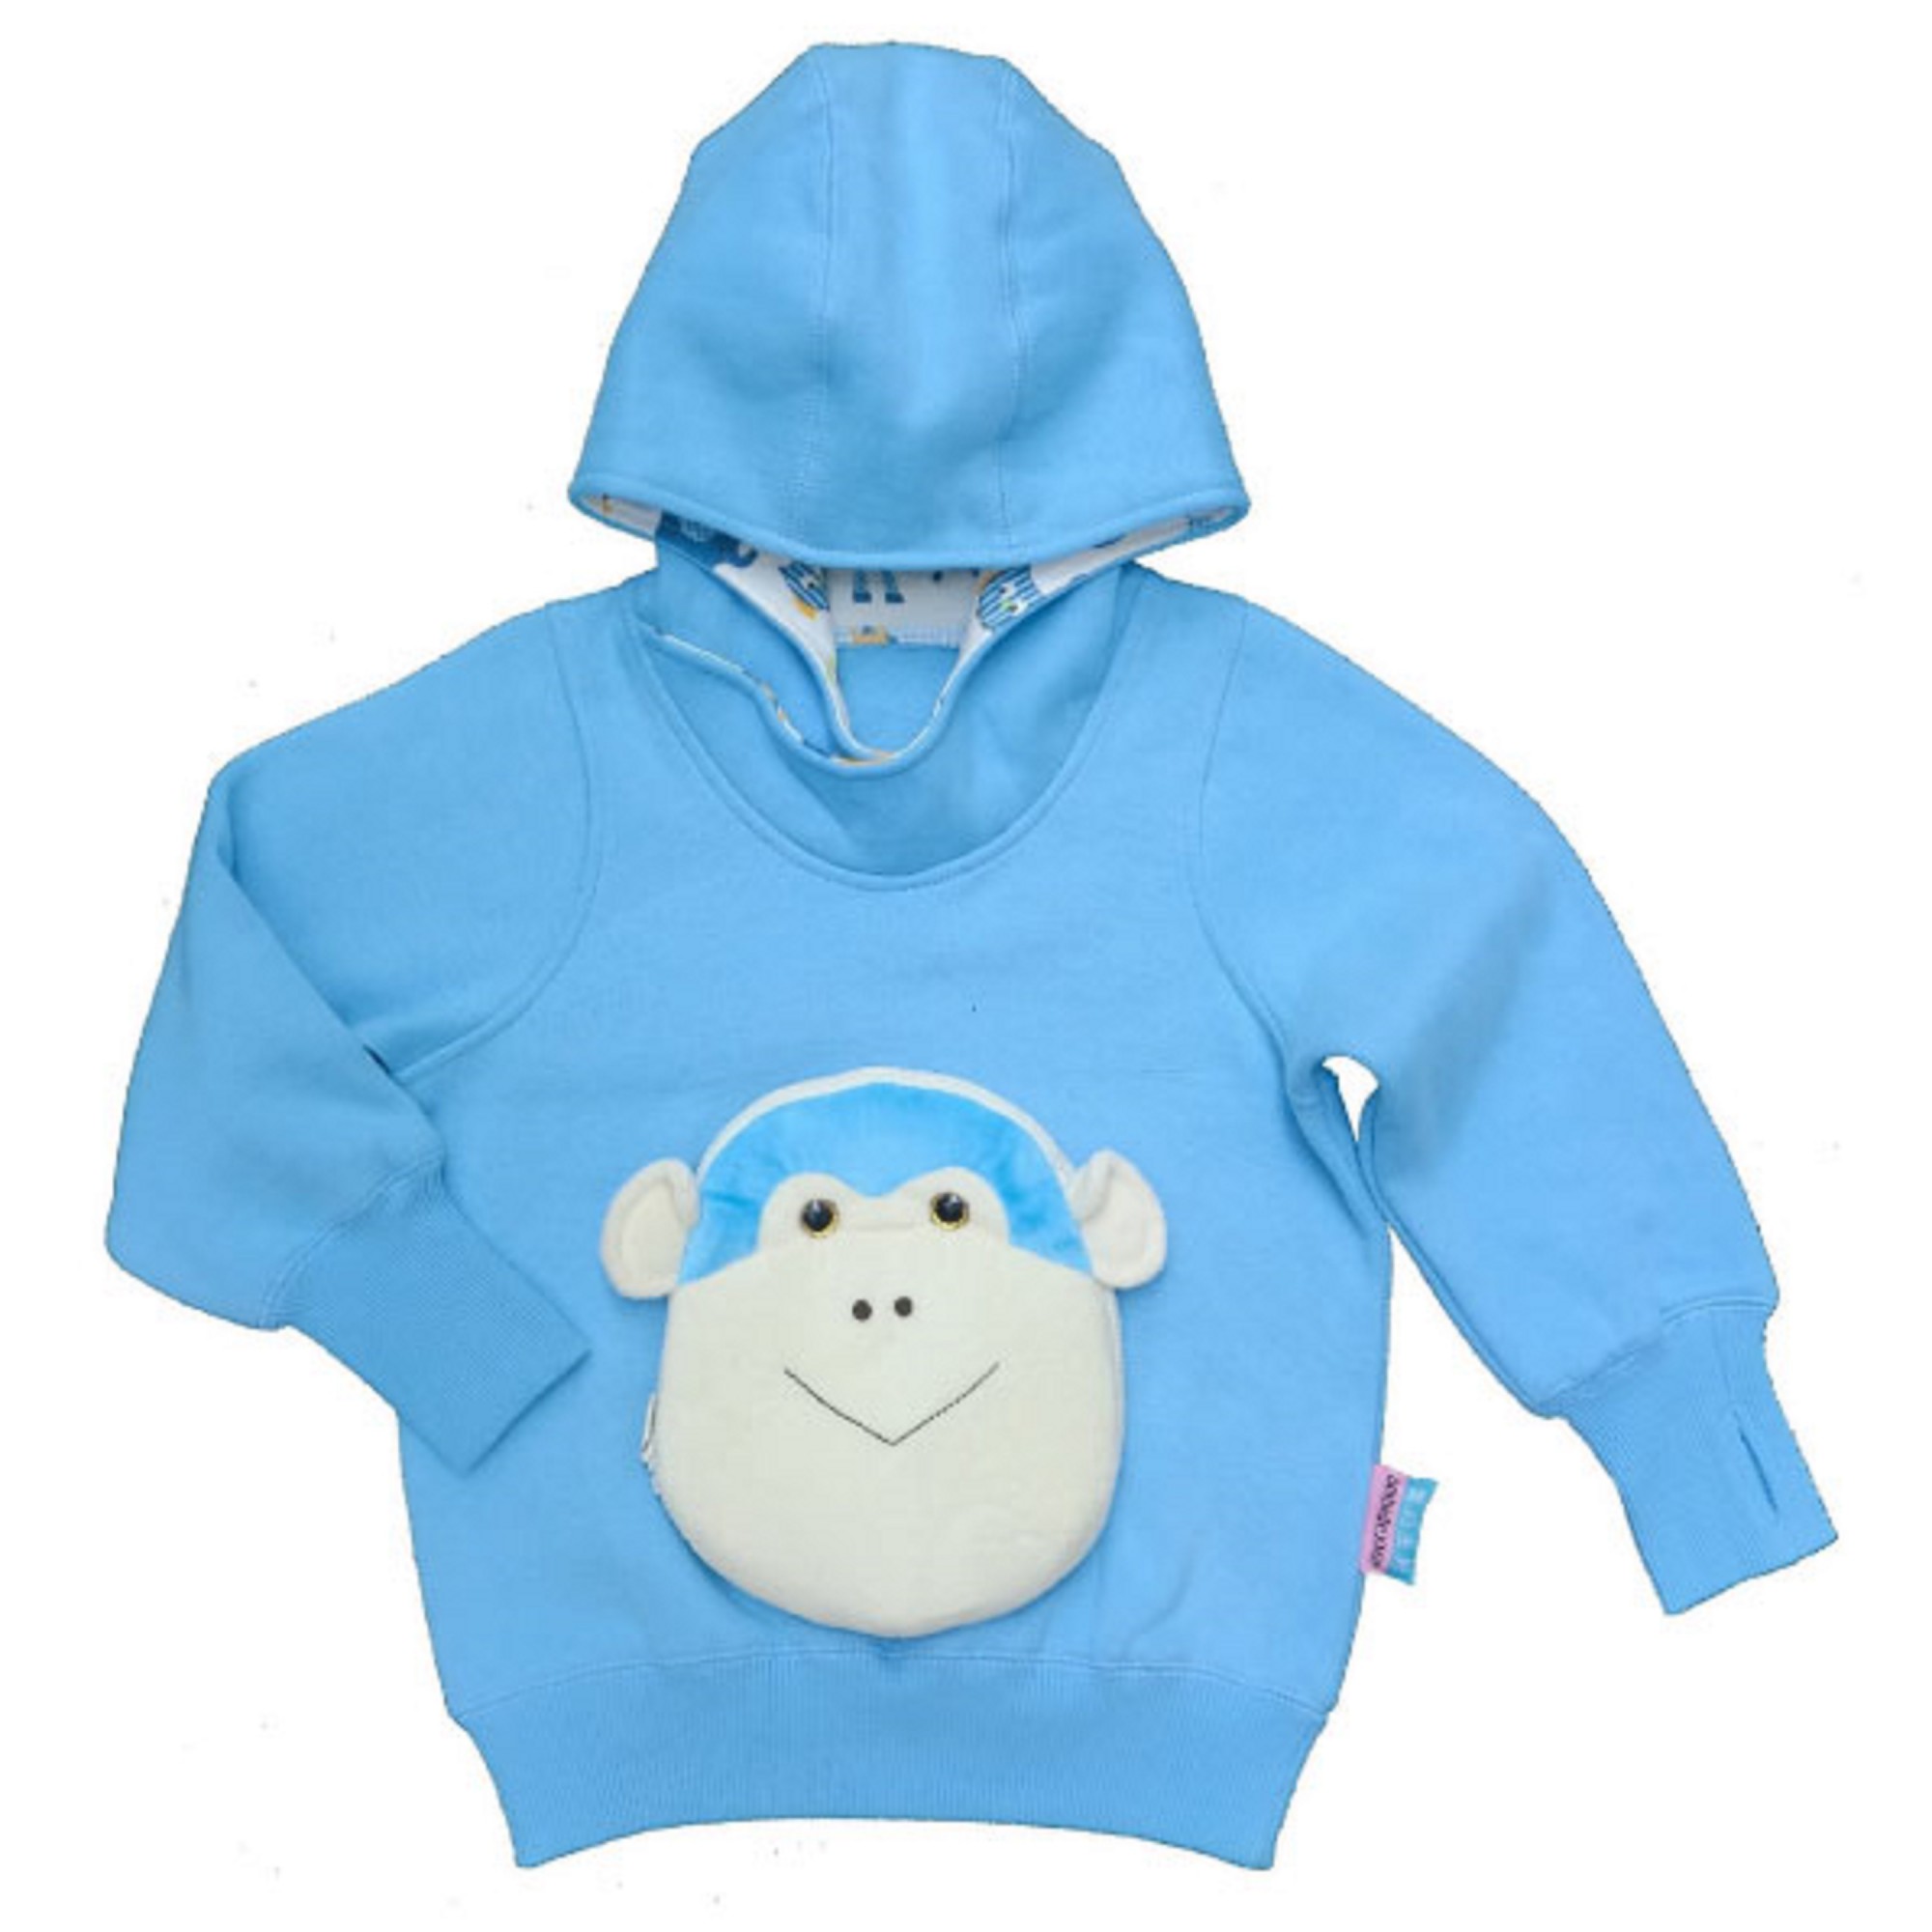 monkey face off hoodies - FOH1712